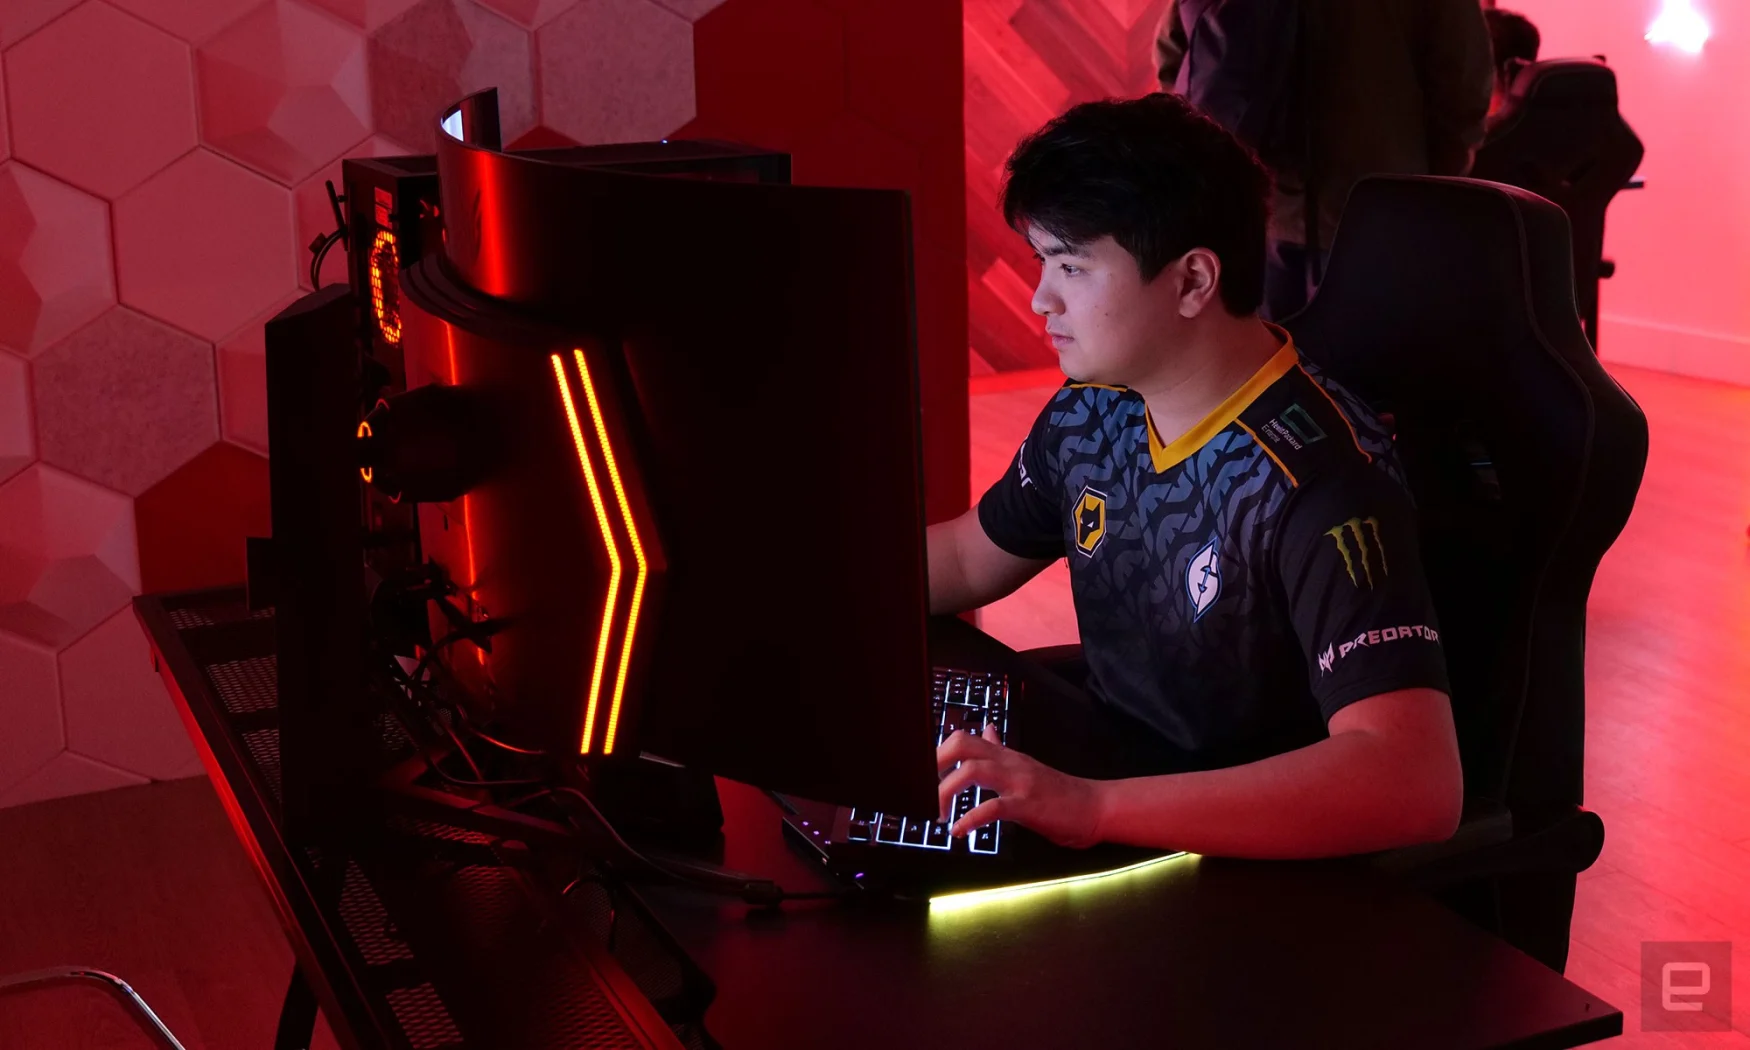 LG brought in professional Valorant players Com (pictured here) and Evil Geniuses' Jawgemo to test their new UltraGear gaming monitor.